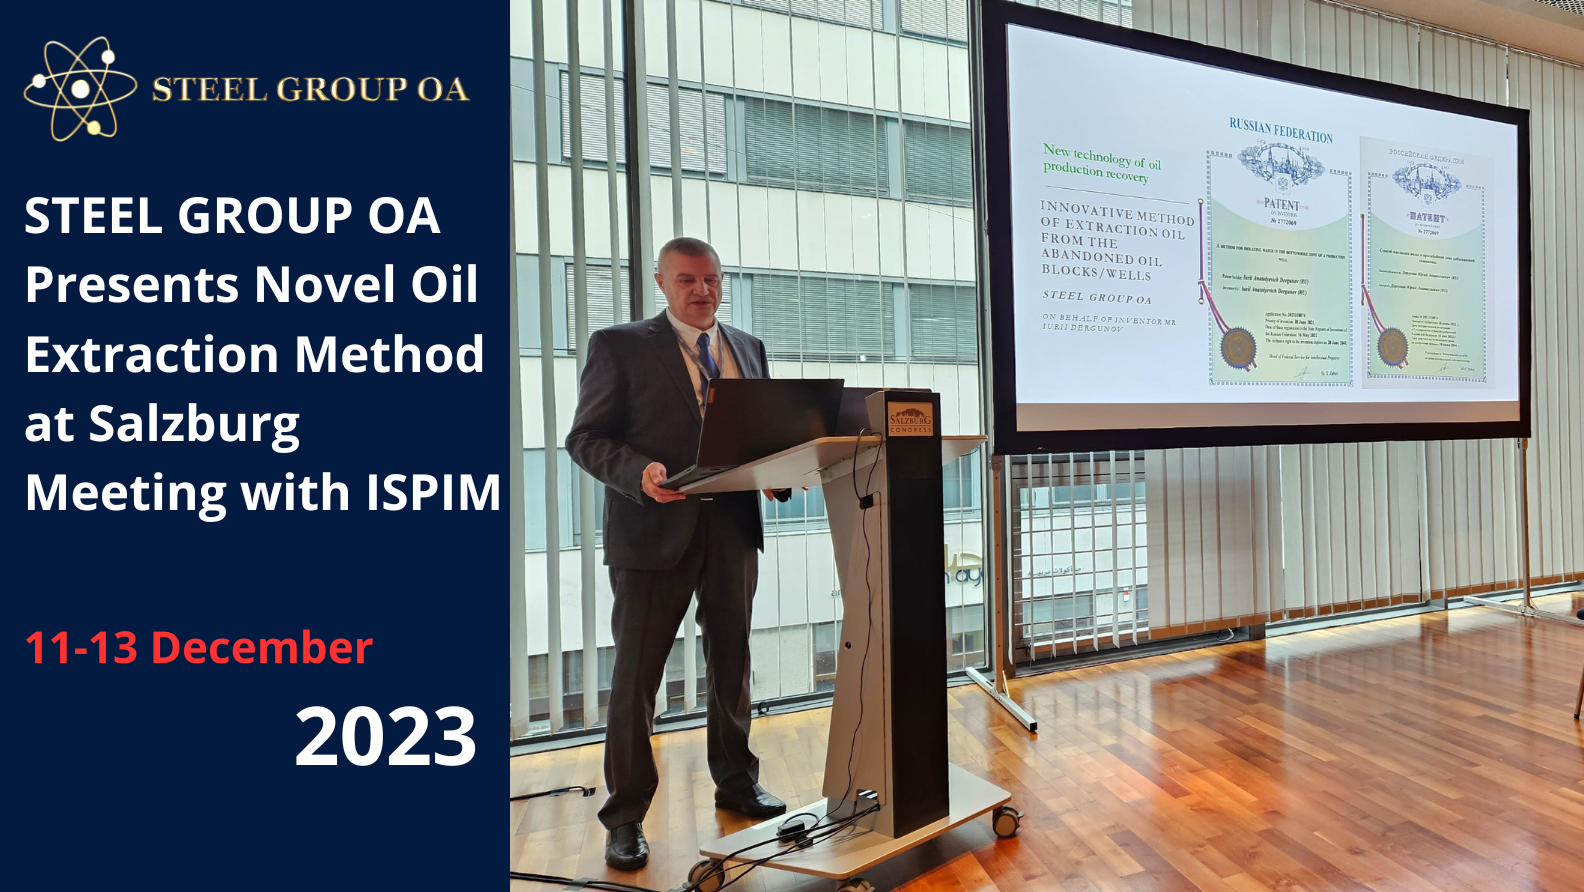 STEEL GROUP OA Presents Novel Oil Extraction Method at Salzburg Meeting with ISPIM